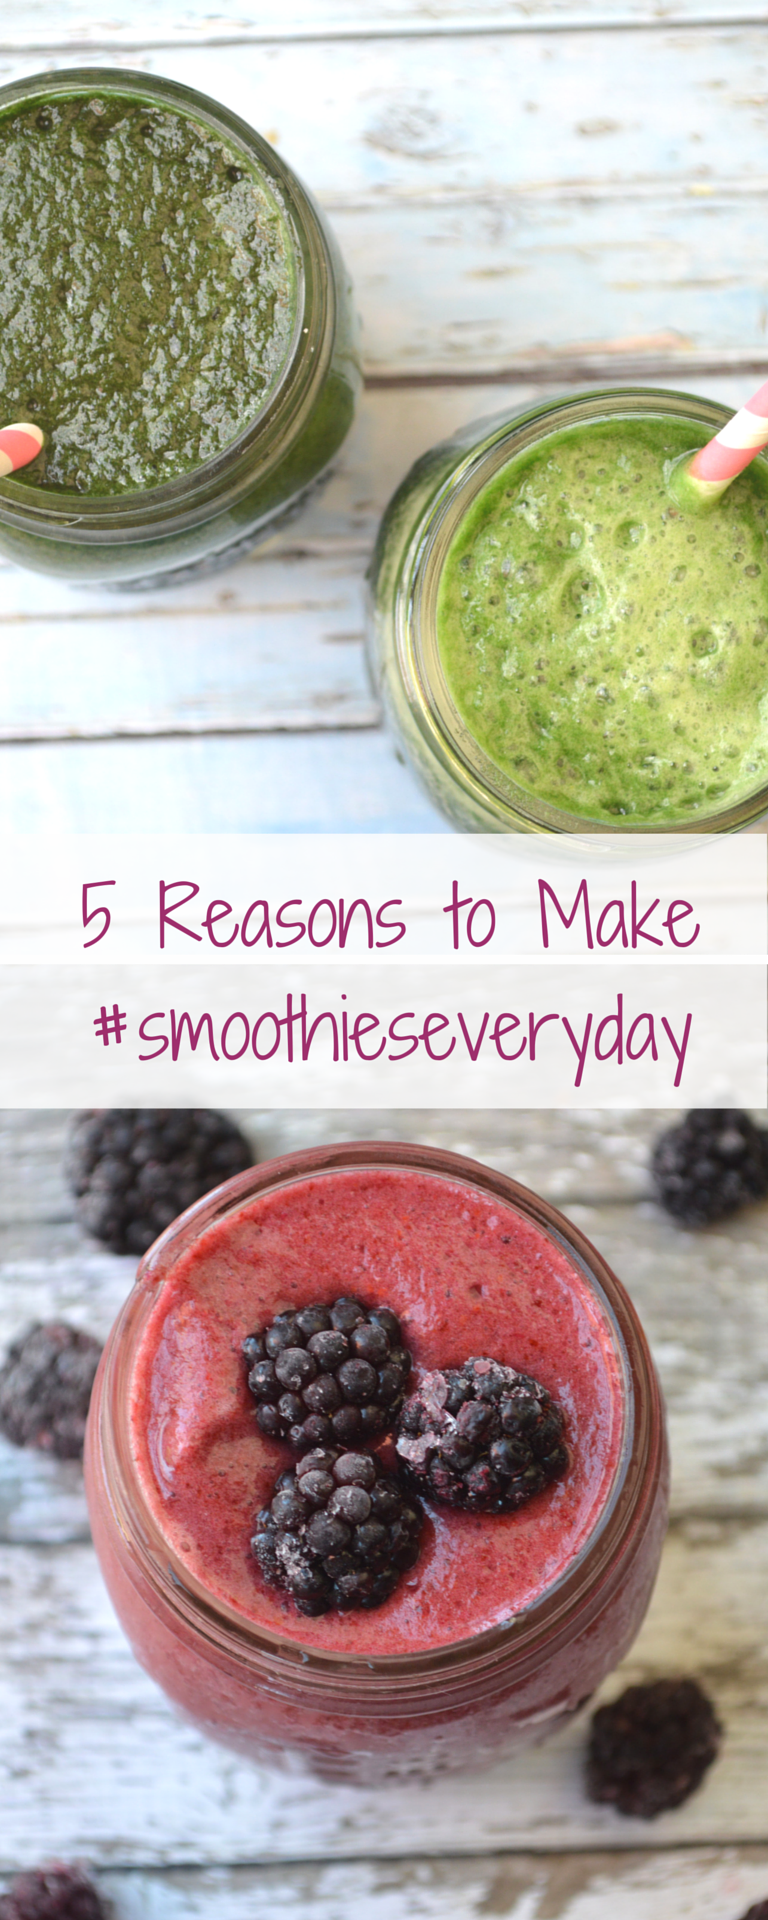 smoothies every day